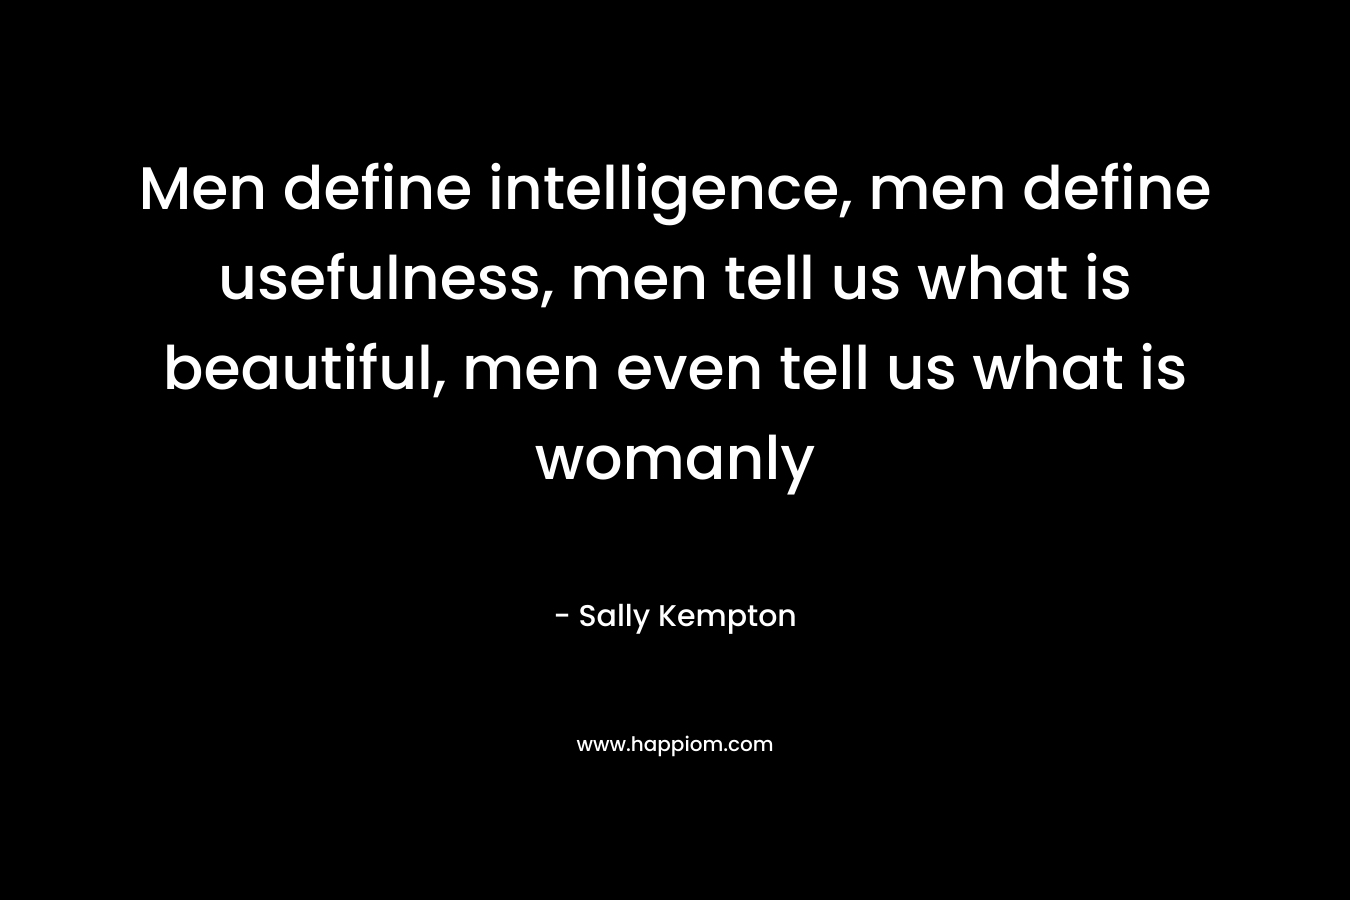 Men define intelligence, men define usefulness, men tell us what is beautiful, men even tell us what is womanly